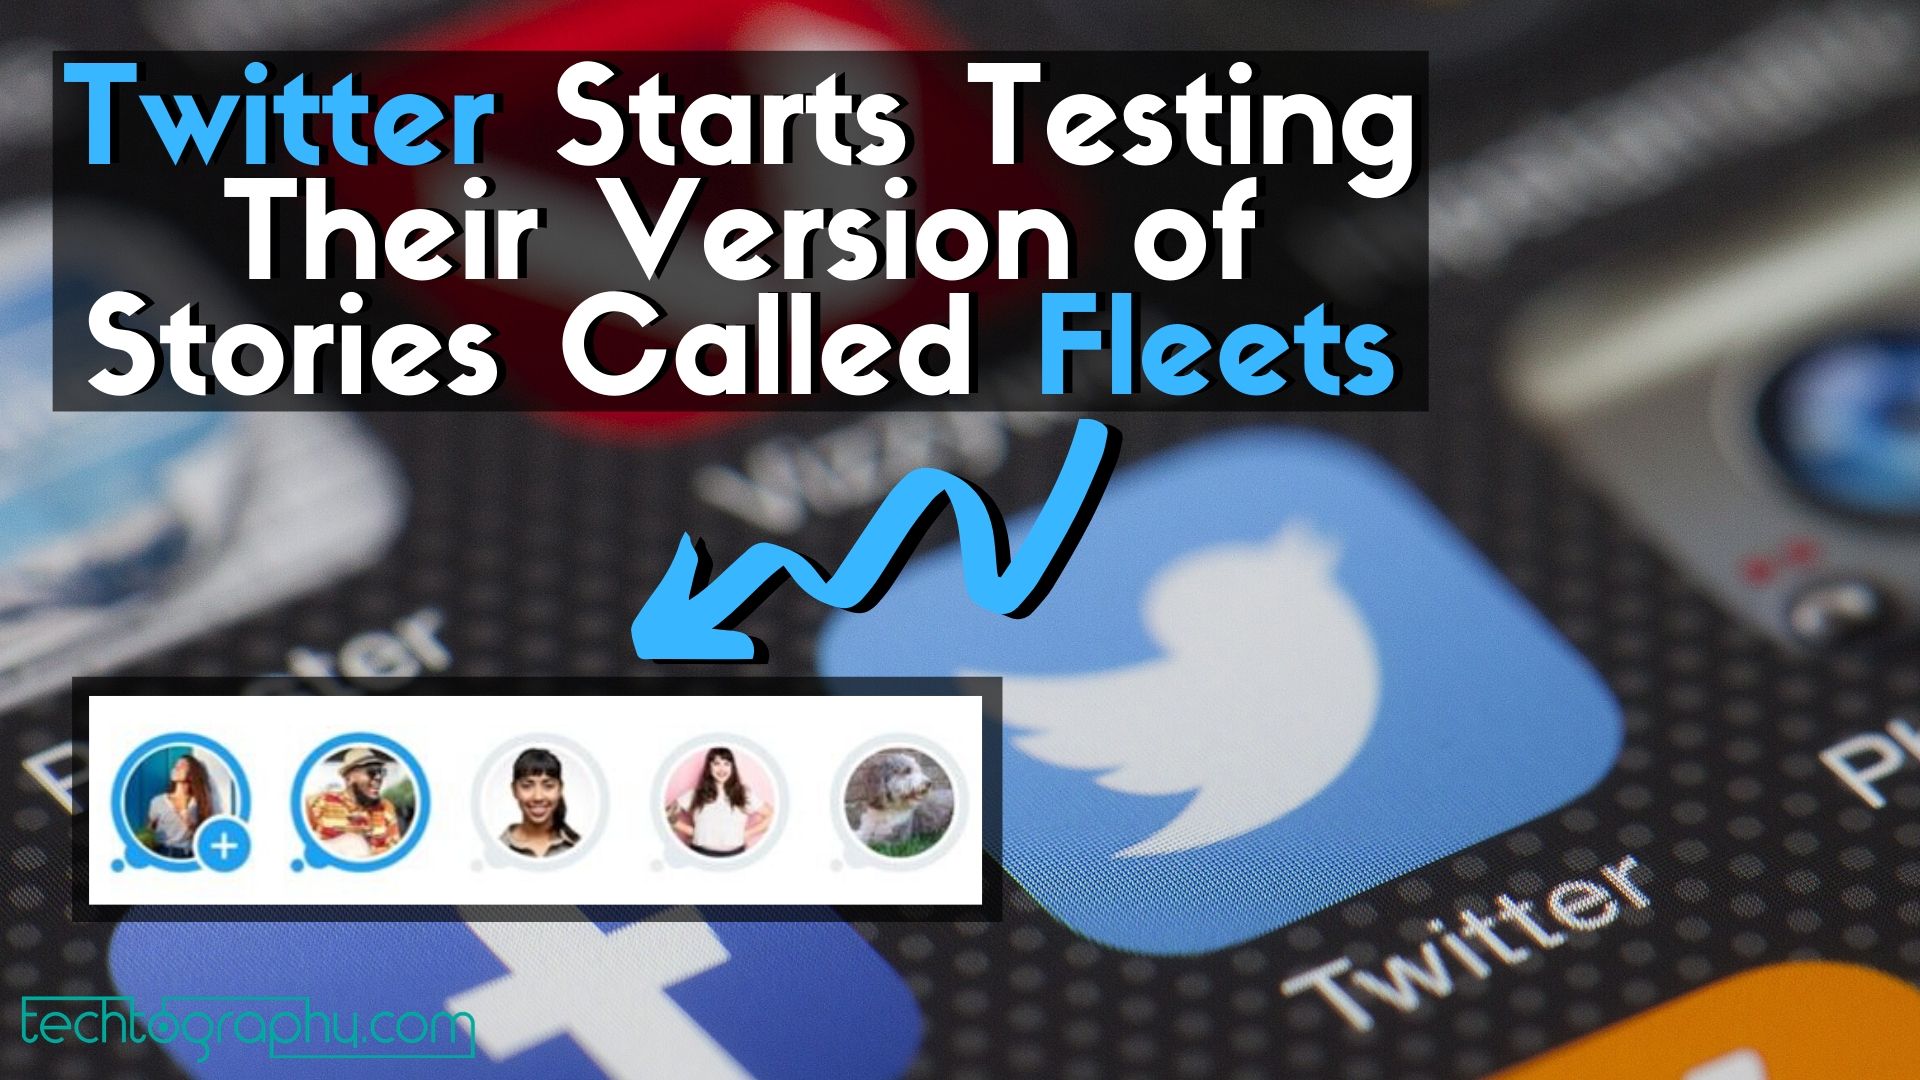 Twitter Starts Testing Their Version of Stories Called Fleets